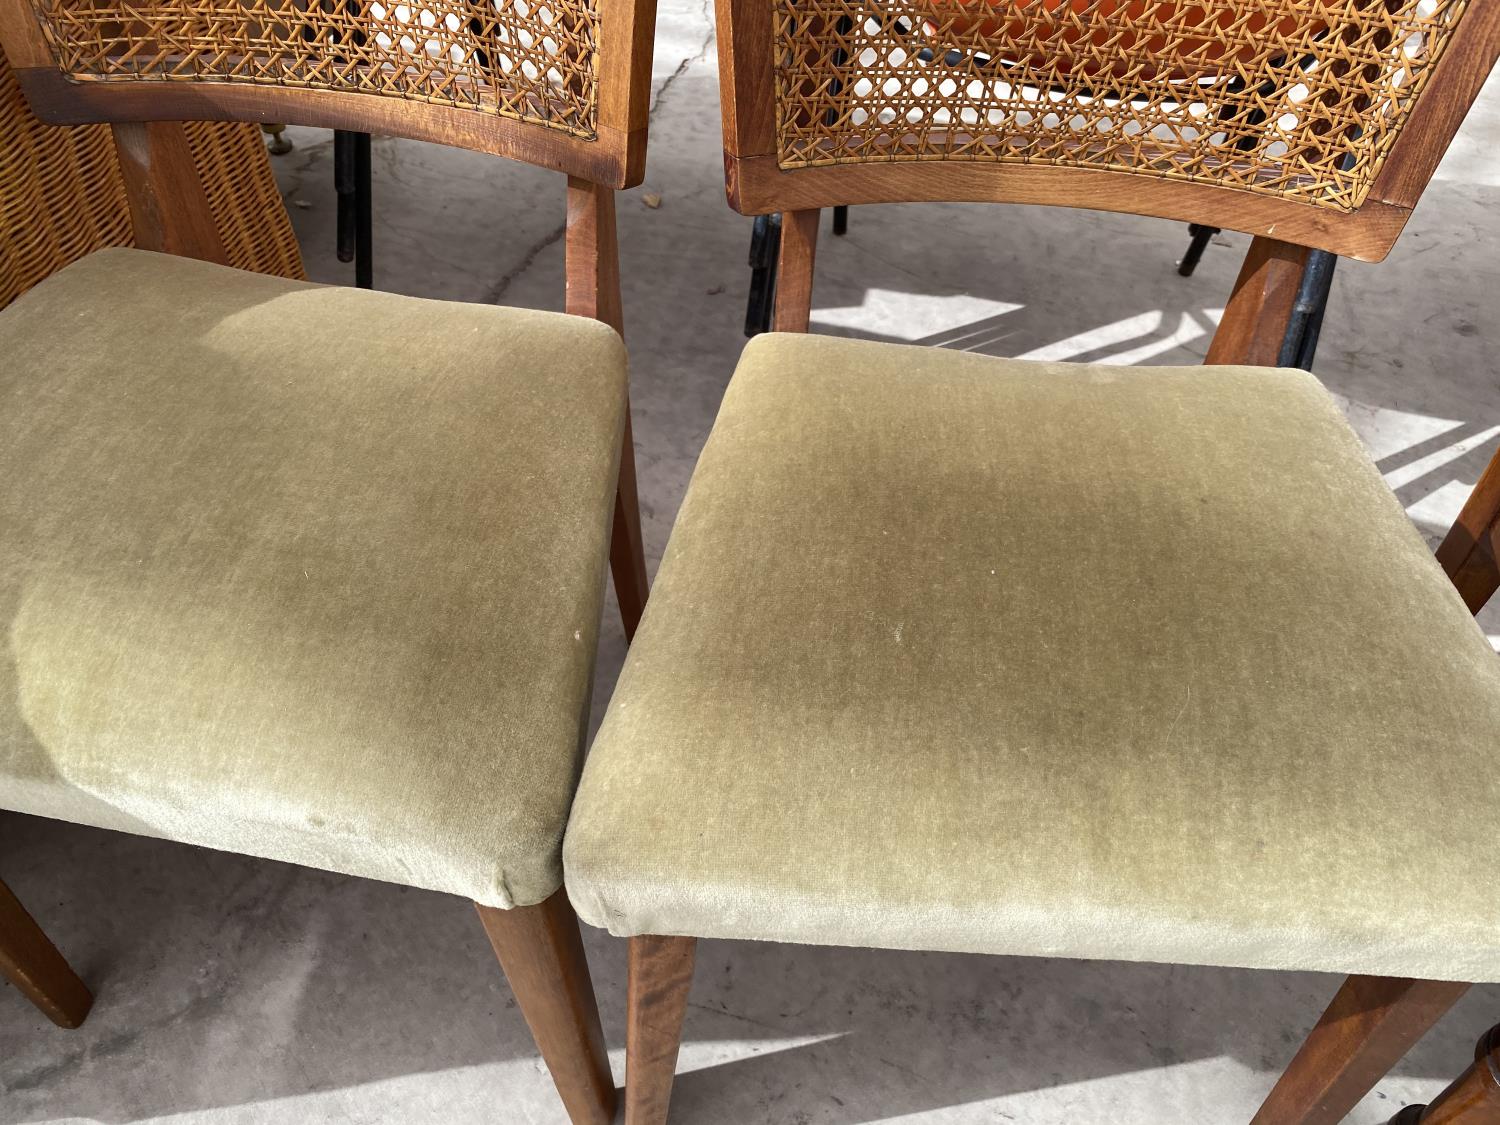 A PAIR OF RETRO TEAK POSSIBLY DANISH DESIGN DINING CHAIRS WITH SPLIT CANE BACKS - Image 3 of 3